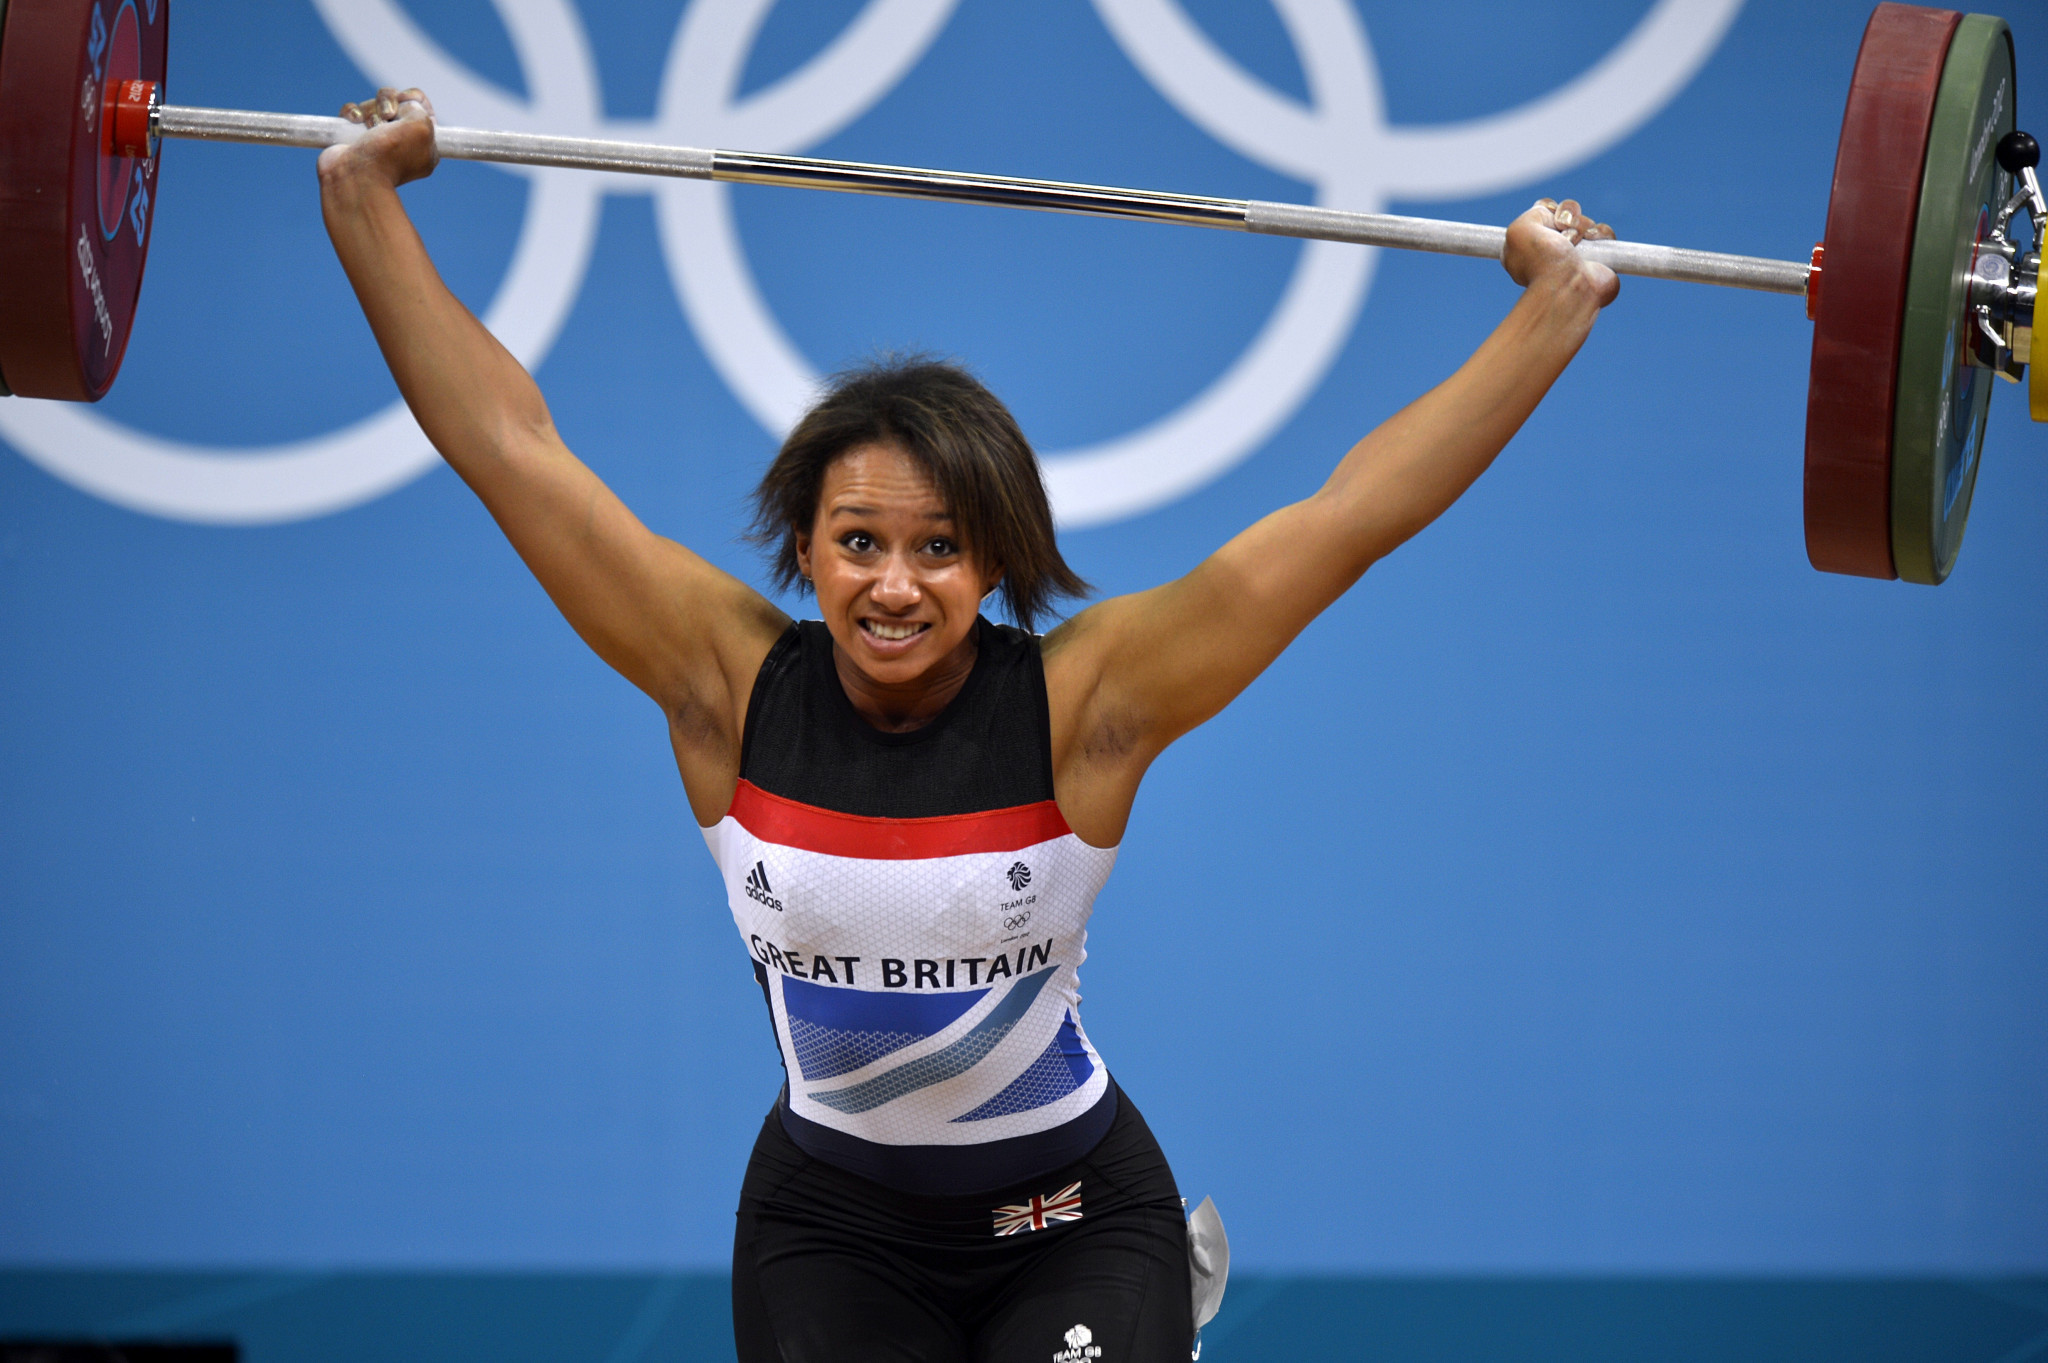 Great Britain has called for the entire IWF Executive Board to step down ©Getty Images